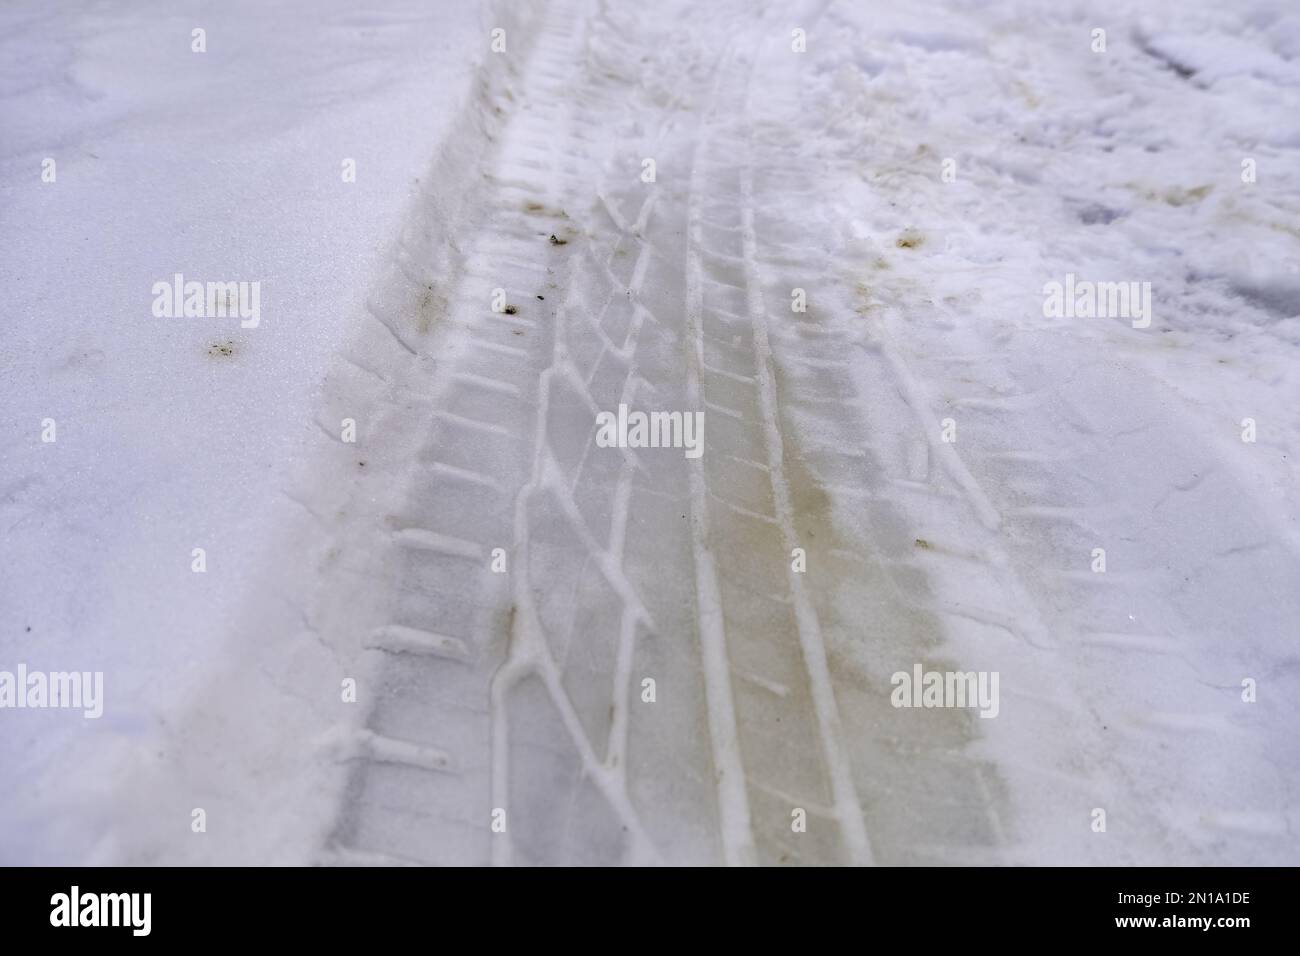 Detail of car wheel signs on a snowy road in winter Stock Photo